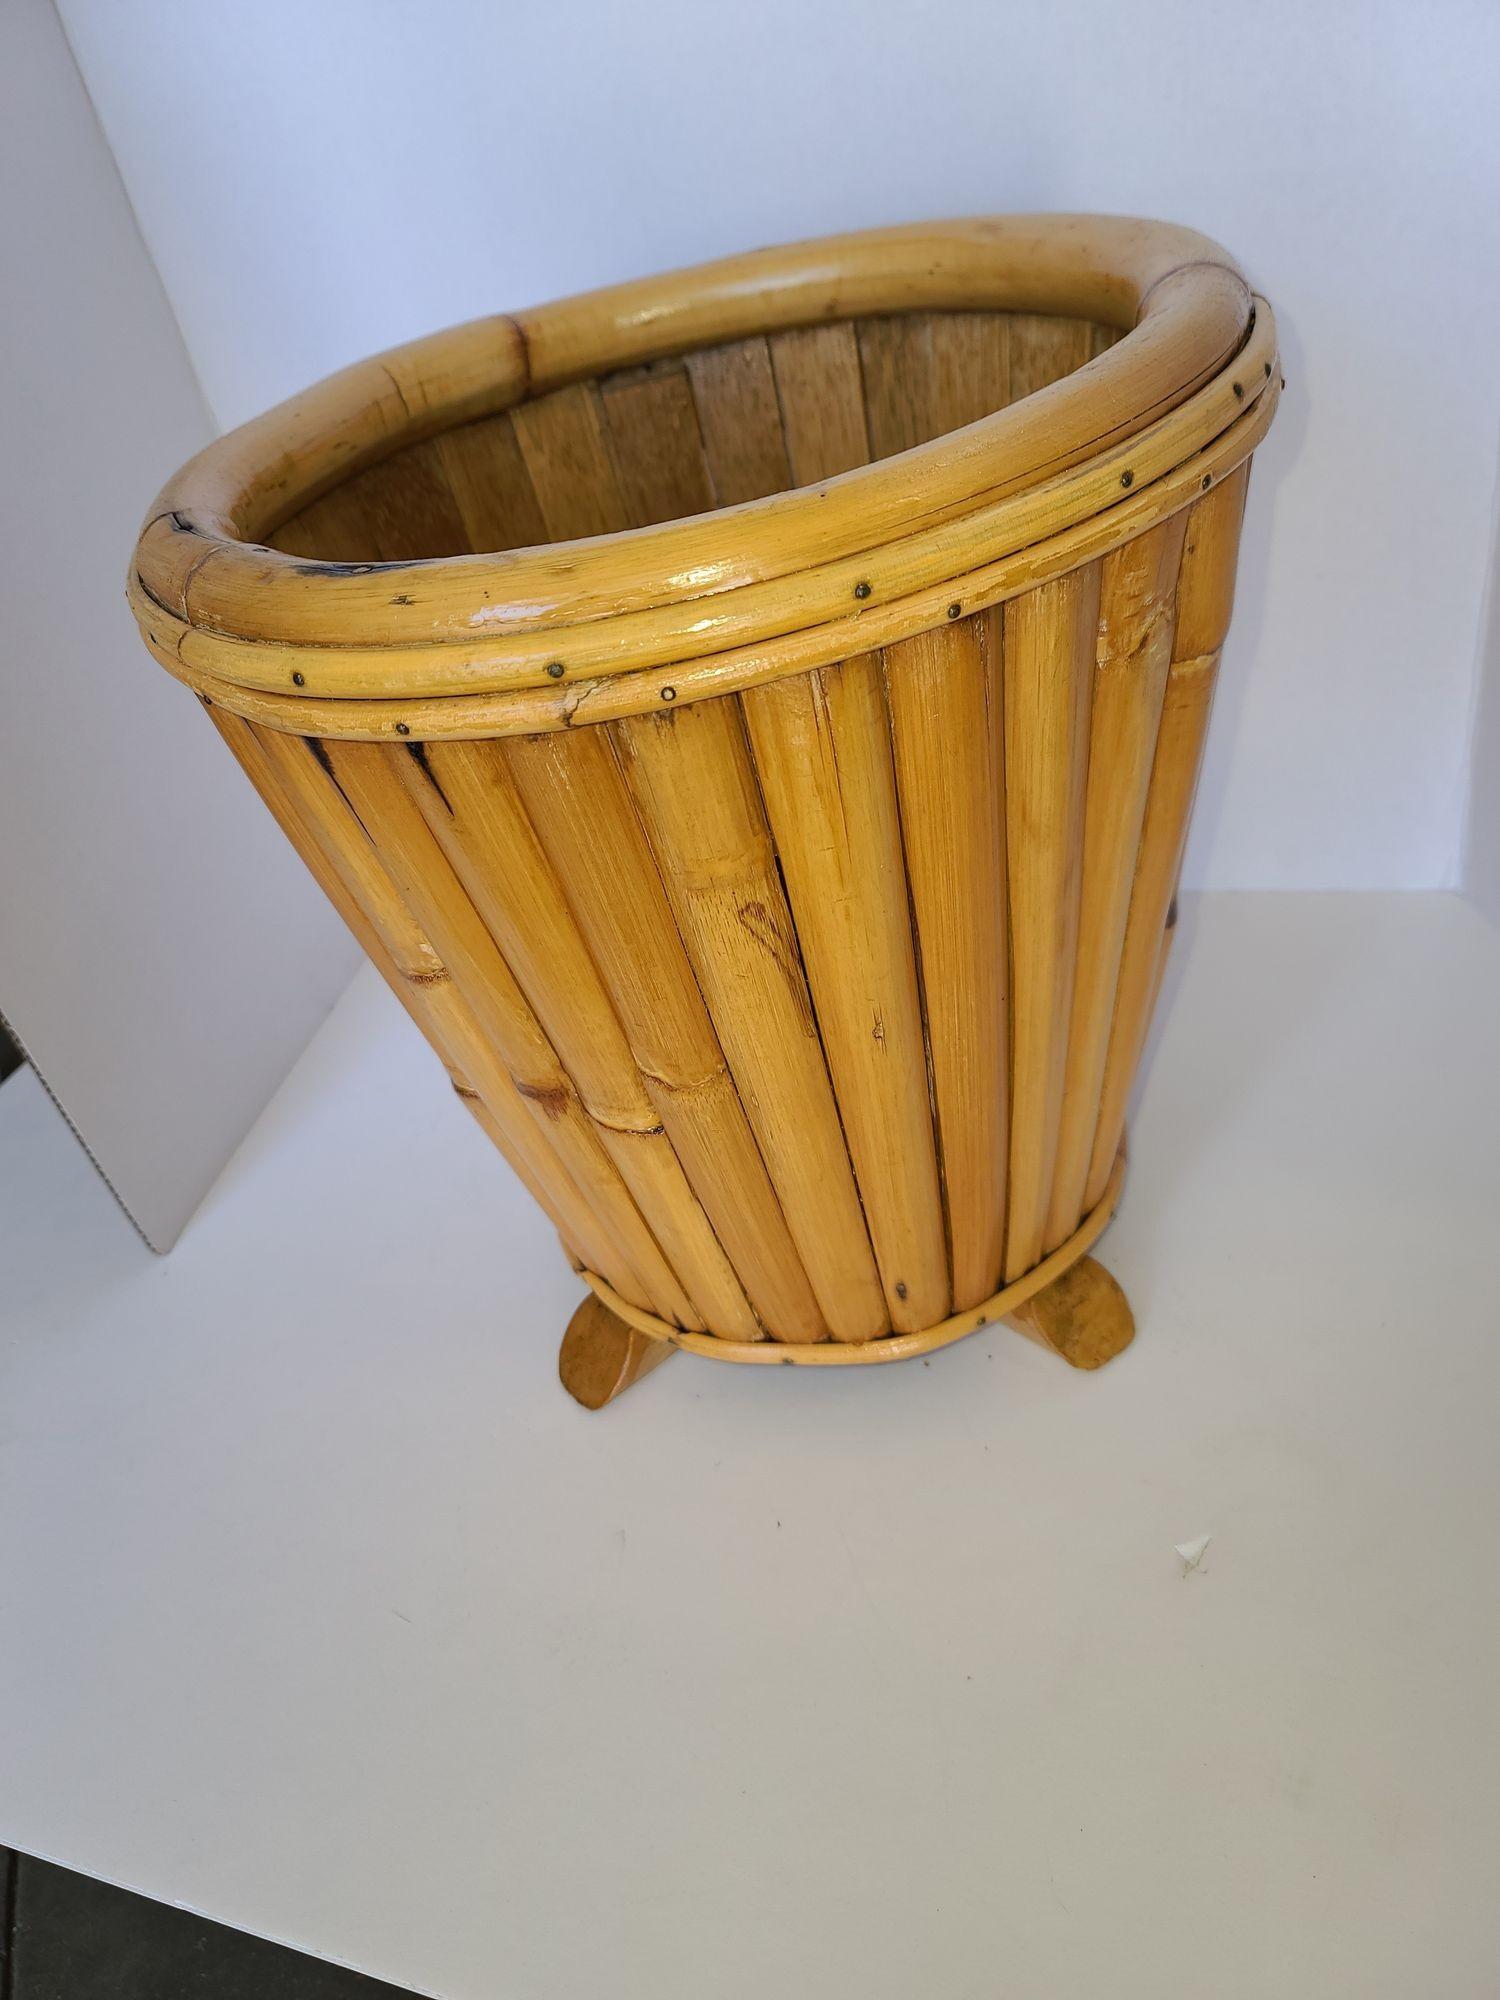 Original Paul Frankl rattan wastebasket featuring a stacked rattan basket fixed to a mahogany base. This basket comes from a Paul Frankl house in Encino California. Please contact the showroom for more details.

We only purchase and sell only the